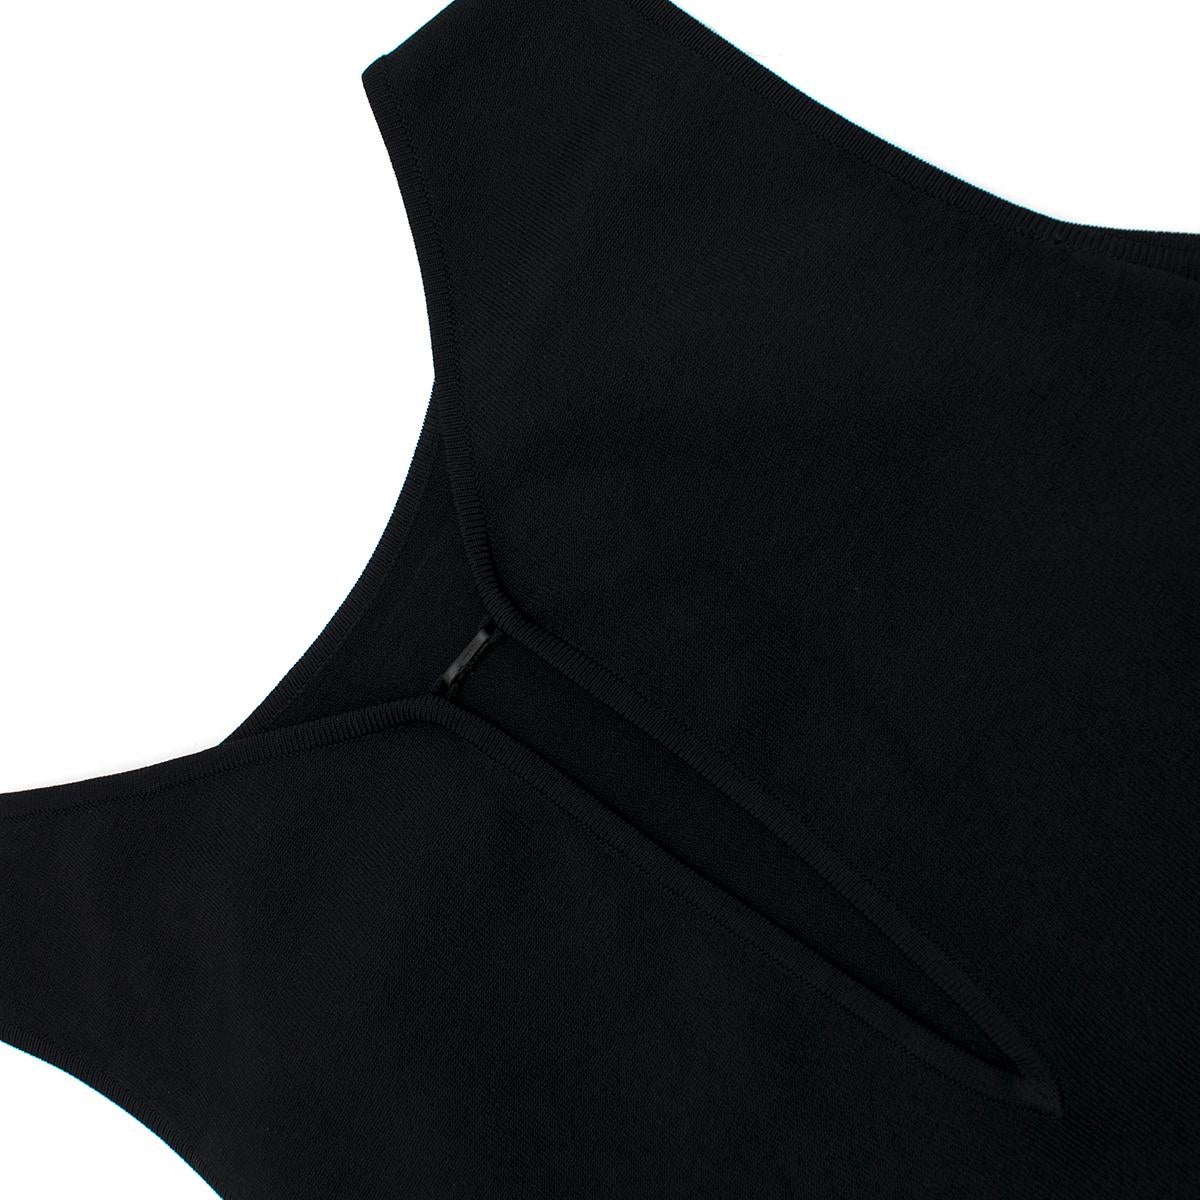 Gucci Black Fitted Sleeveless Top - Size M 6